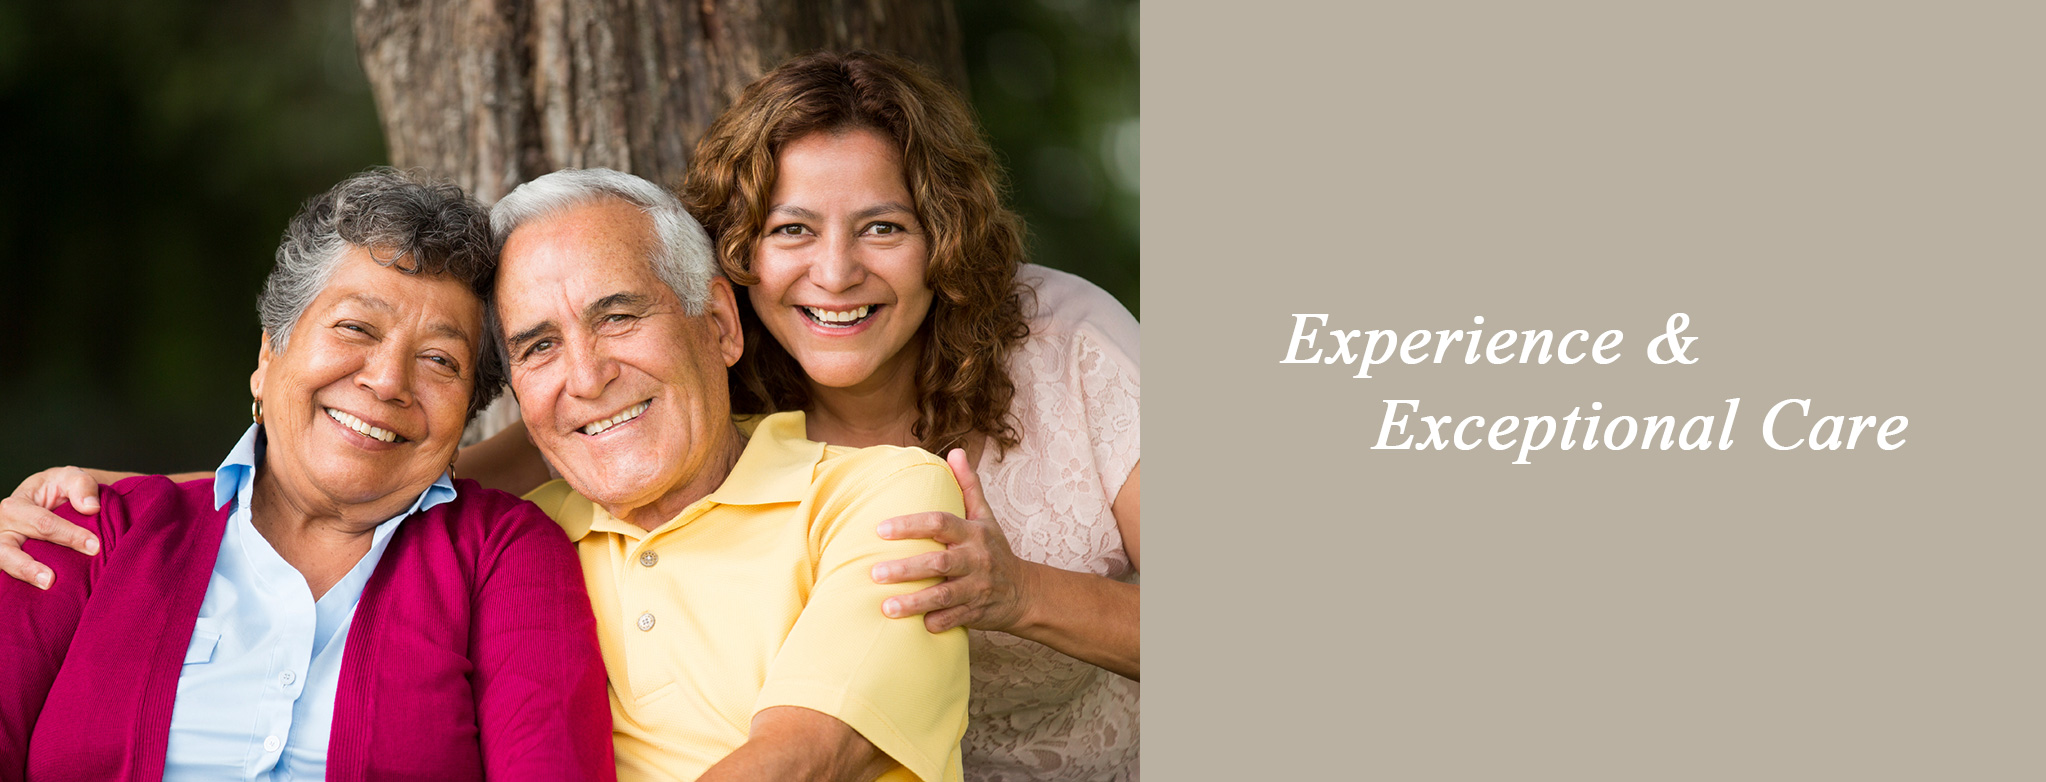 Latino family with elderly patient Experience and Exceptional Care